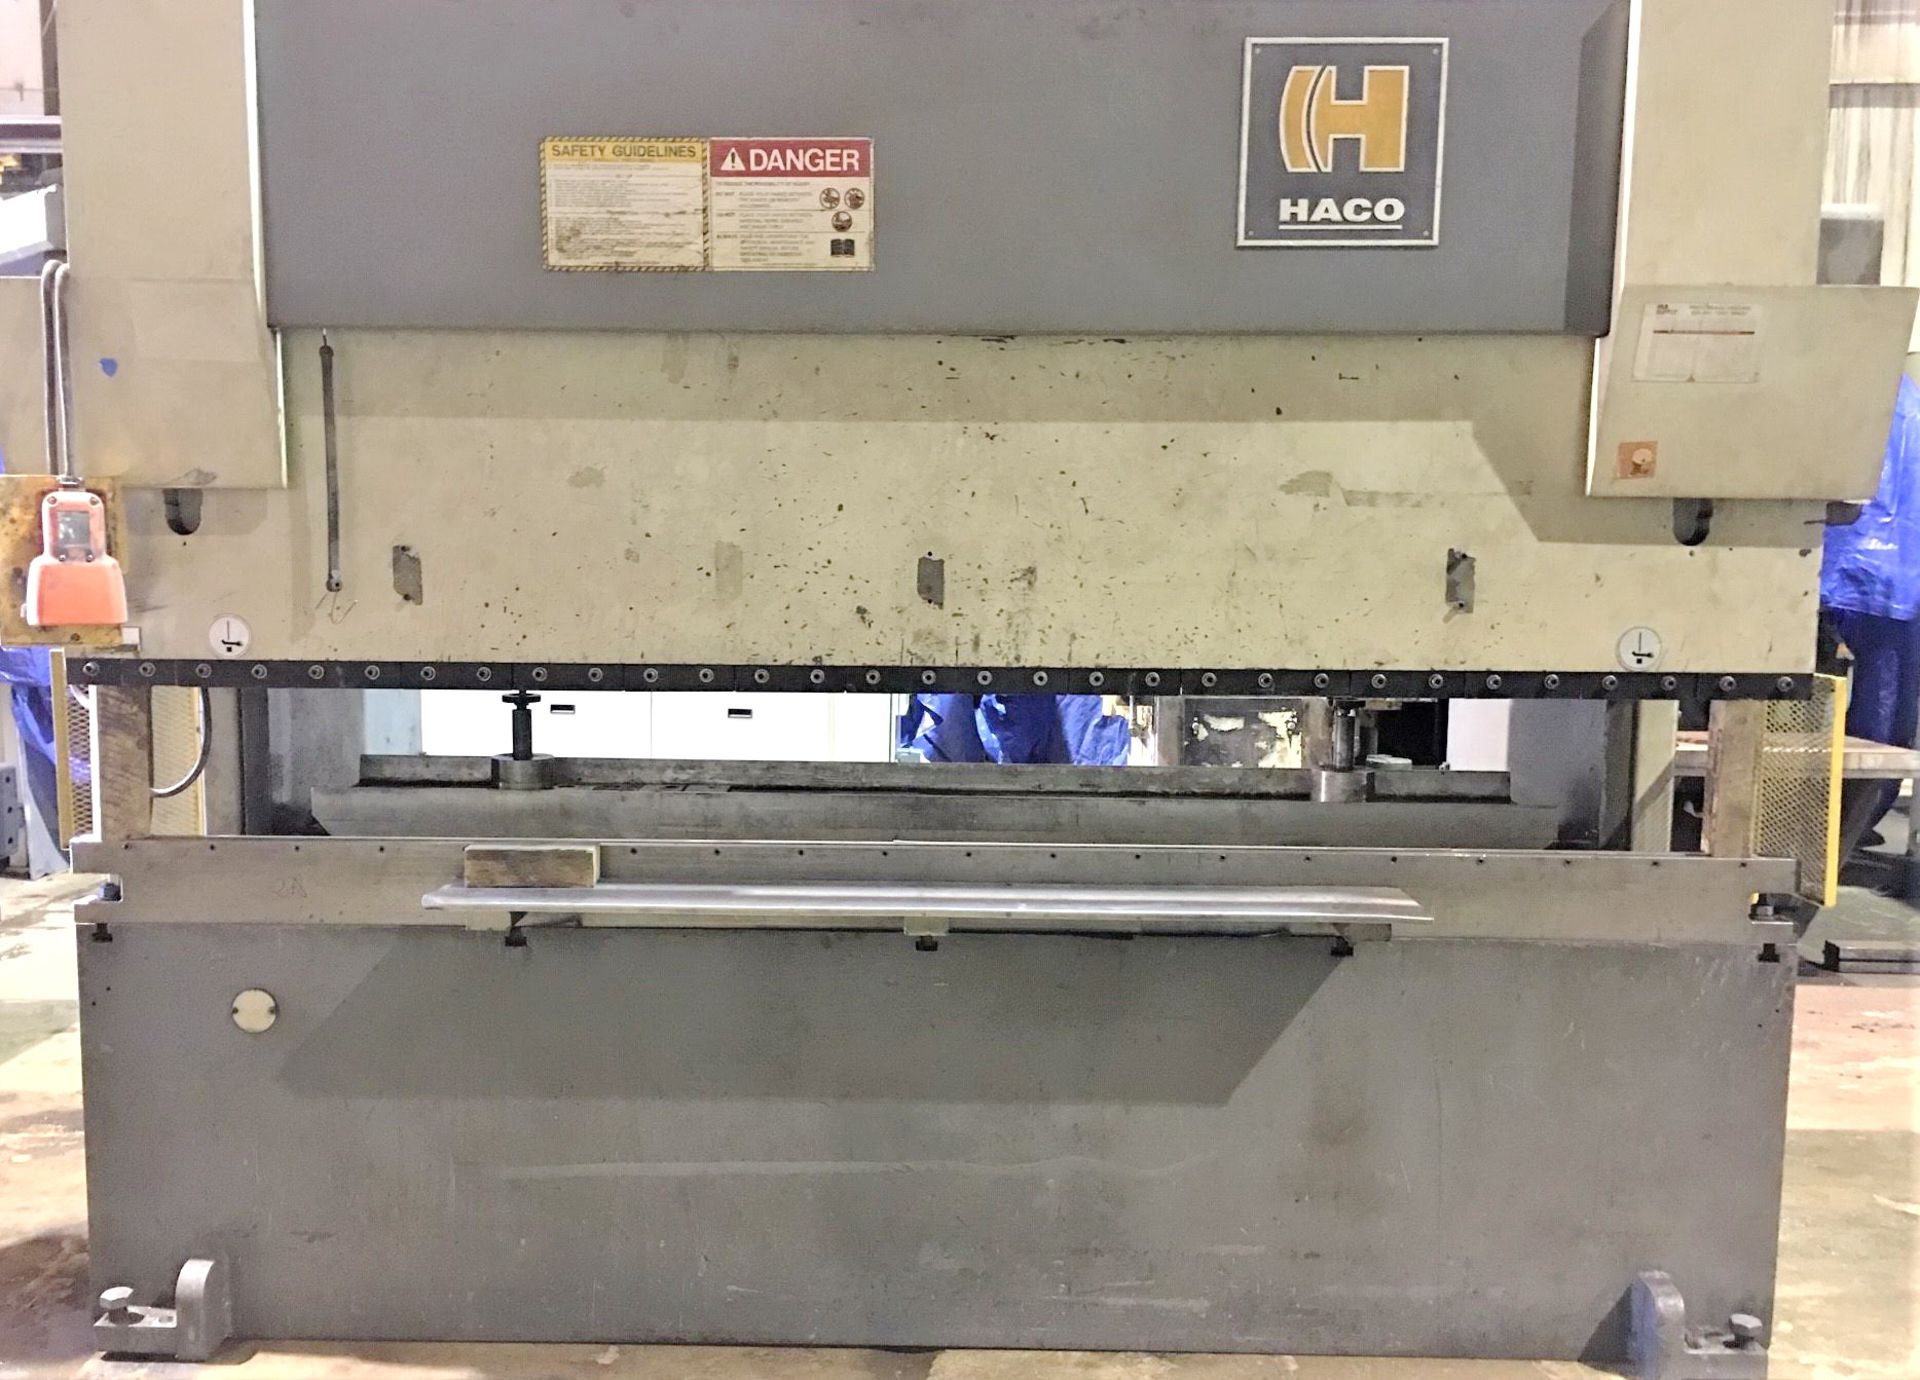 Haco Atlantic CNC Hydraulic Press Brake 120 Ton x 10', Located In Painesville, OH - 8615P - Image 4 of 14